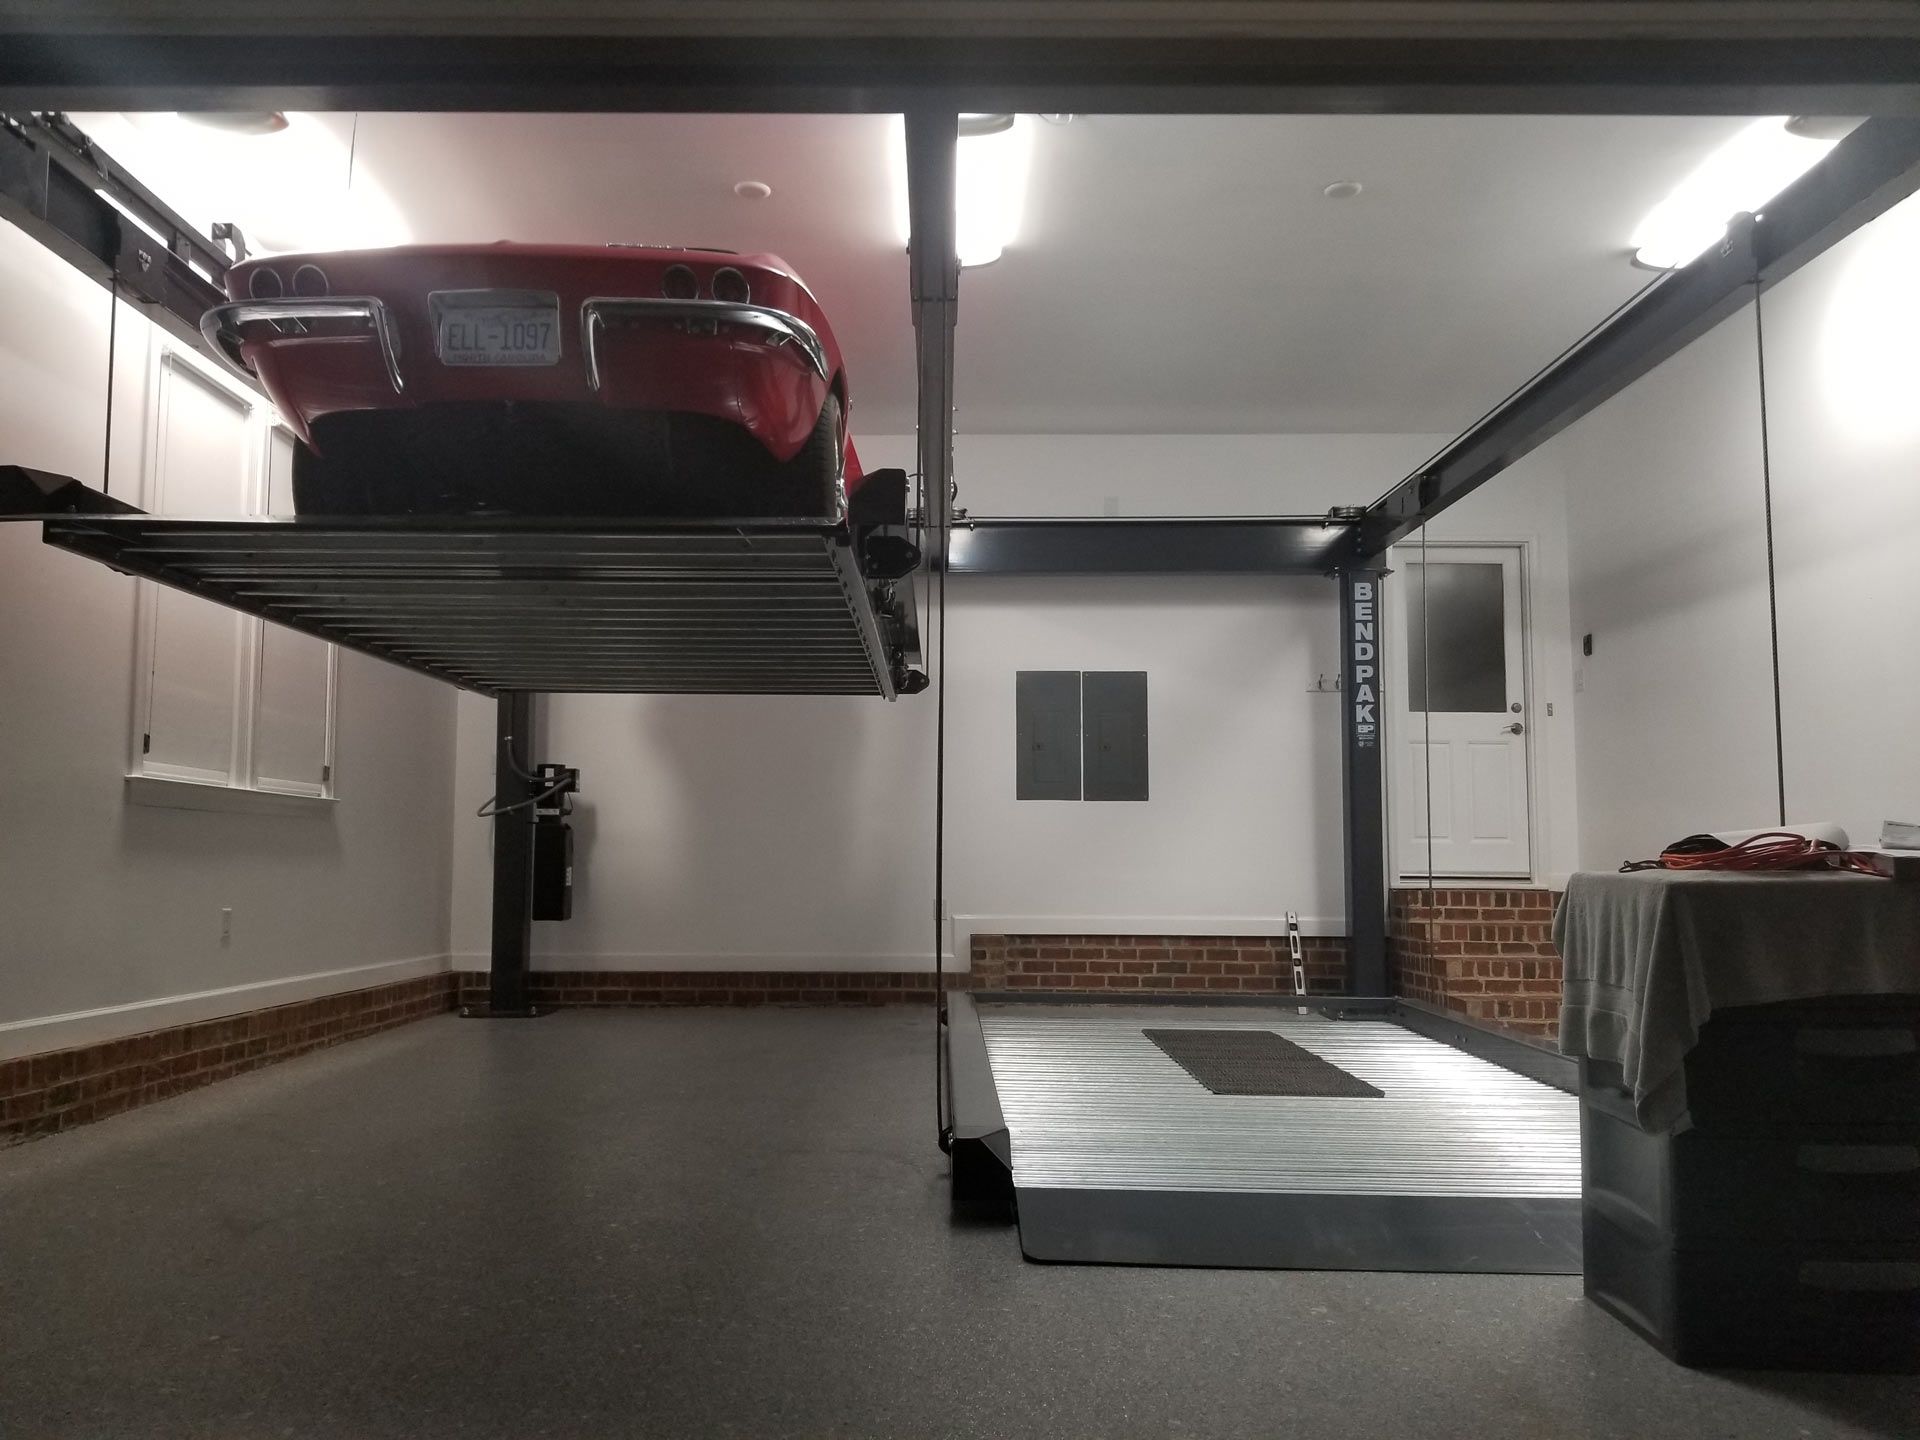 a red car is parked on a lift in a garage